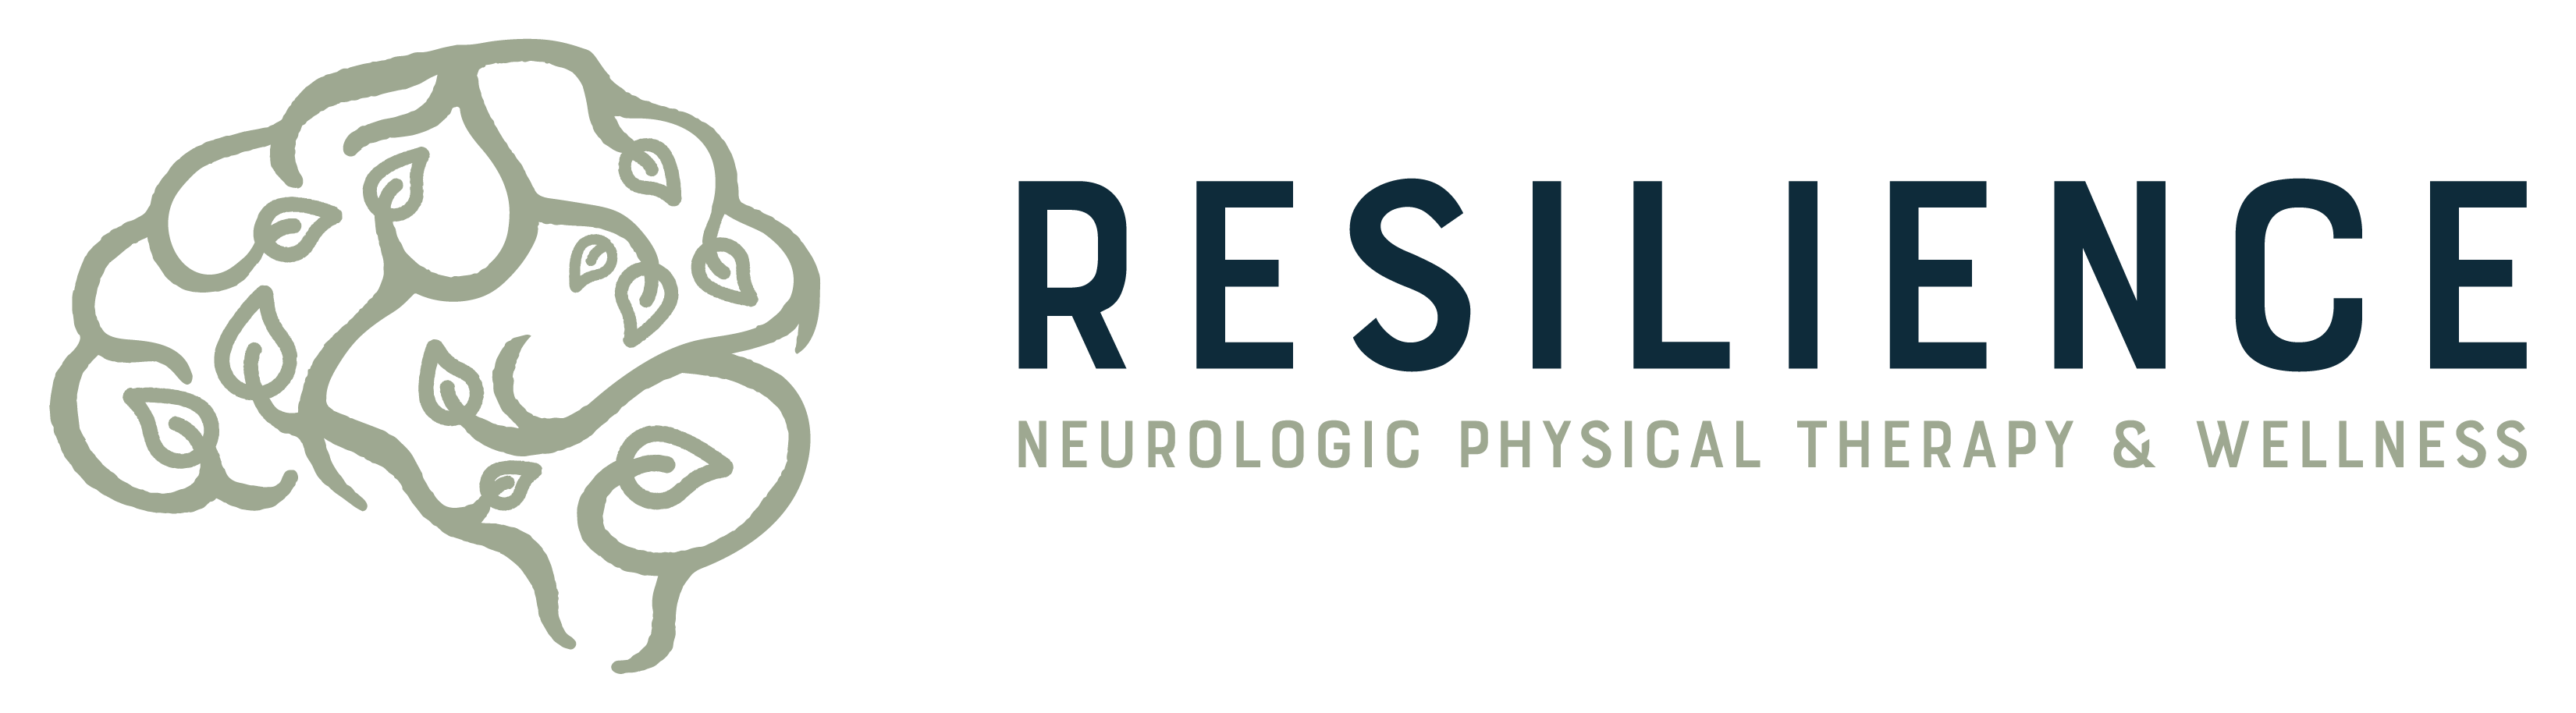 Resilience Neurologic Physical Therapy & Wellness